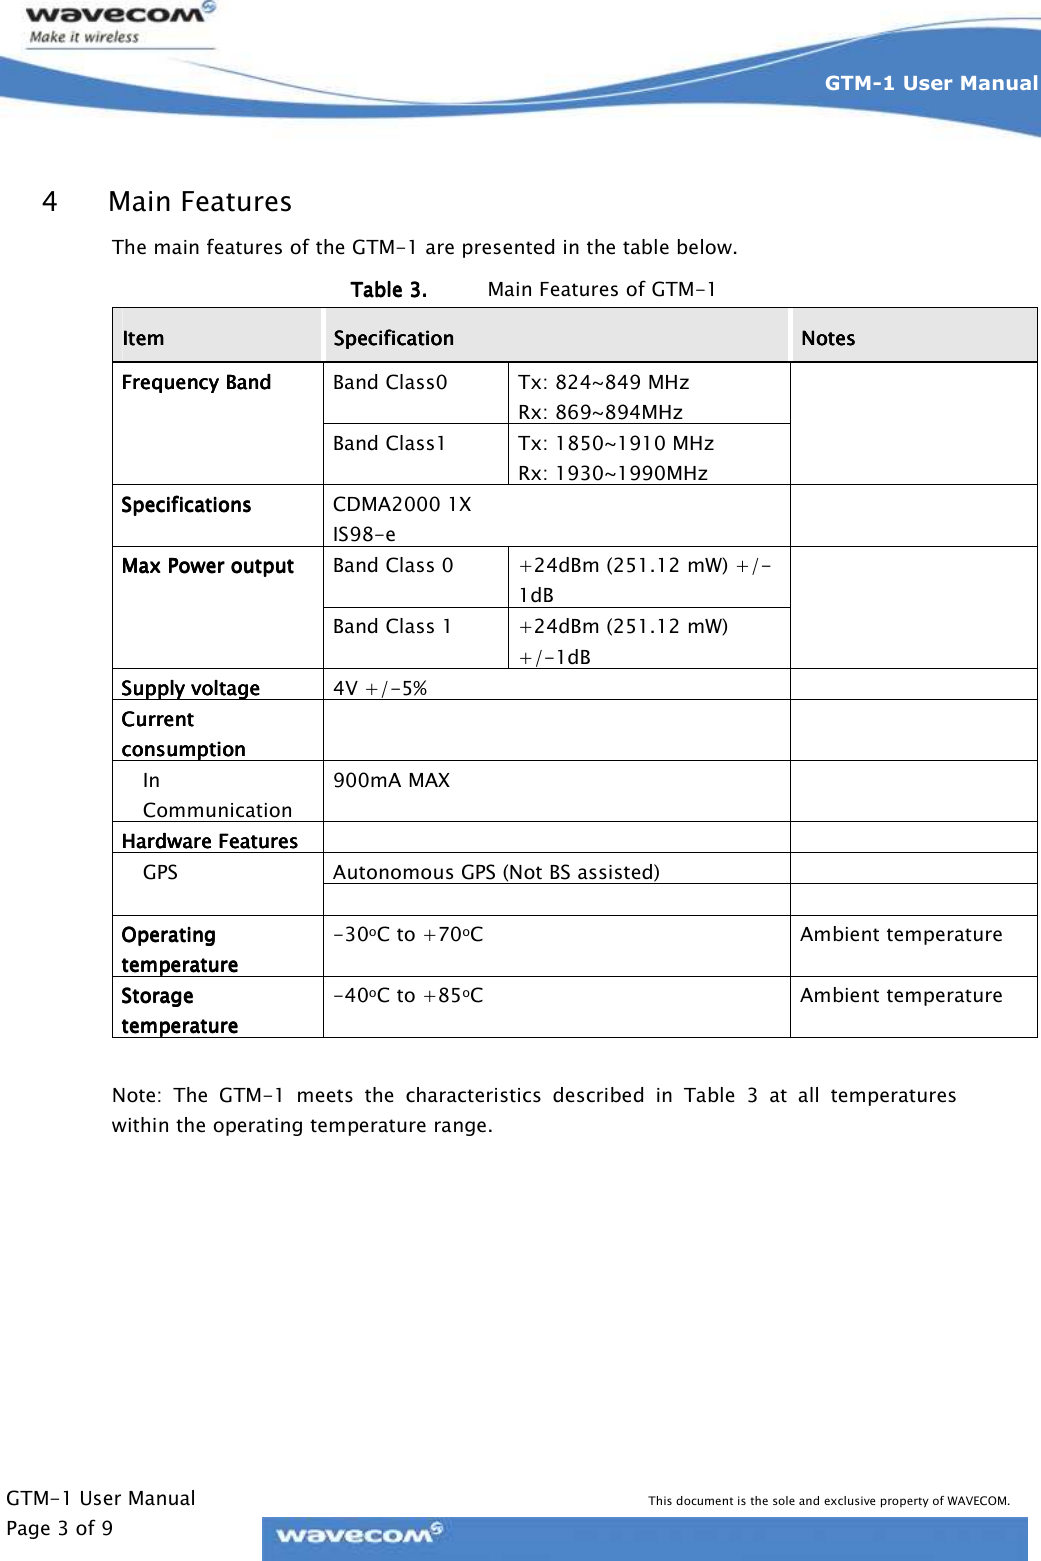     GTM-1 User Manual This document is the sole and exclusive property of WAVECOM. Page 3 of 9 GTM-1 User Manual     4 Main Features The main features of the GTM-1 are presented in the table below. Table 3.Table 3.Table 3.Table 3. Main Features of GTM-1 ItemItemItemItem     SpecificationSpecificationSpecificationSpecification     NotesNotesNotesNotes    Band Class0  Tx: 824~849 MHz Rx: 869~894MHz Frequency BandFrequency BandFrequency BandFrequency Band    Band Class1   Tx: 1850~1910 MHz Rx: 1930~1990MHz  SpecificationsSpecificationsSpecificationsSpecifications     CDMA2000 1X IS98-e  Band Class 0   +24dBm (251.12 mW) +/-1dB Max Power outputMax Power outputMax Power outputMax Power output    Band Class 1  +24dBm (251.12 mW)  +/-1dB  Supply voltageSupply voltageSupply voltageSupply voltage     4V +/-5%   Current Current Current Current consumptionconsumptionconsumptionconsumption        In Communication 900mA MAX    Hardware FeaturesHardware FeaturesHardware FeaturesHardware Features         Autonomous GPS (Not BS assisted)    GPS    Operating Operating Operating Operating temperaturetemperaturetemperaturetemperature    -30oC to +70oC  Ambient temperature Storage Storage Storage Storage temperaturetemperaturetemperaturetemperature    -40oC to +85oC  Ambient temperature  Note:  The  GTM-1  meets  the  characteristics  described  in  Table  3  at  all  temperatures within the operating temperature range. 